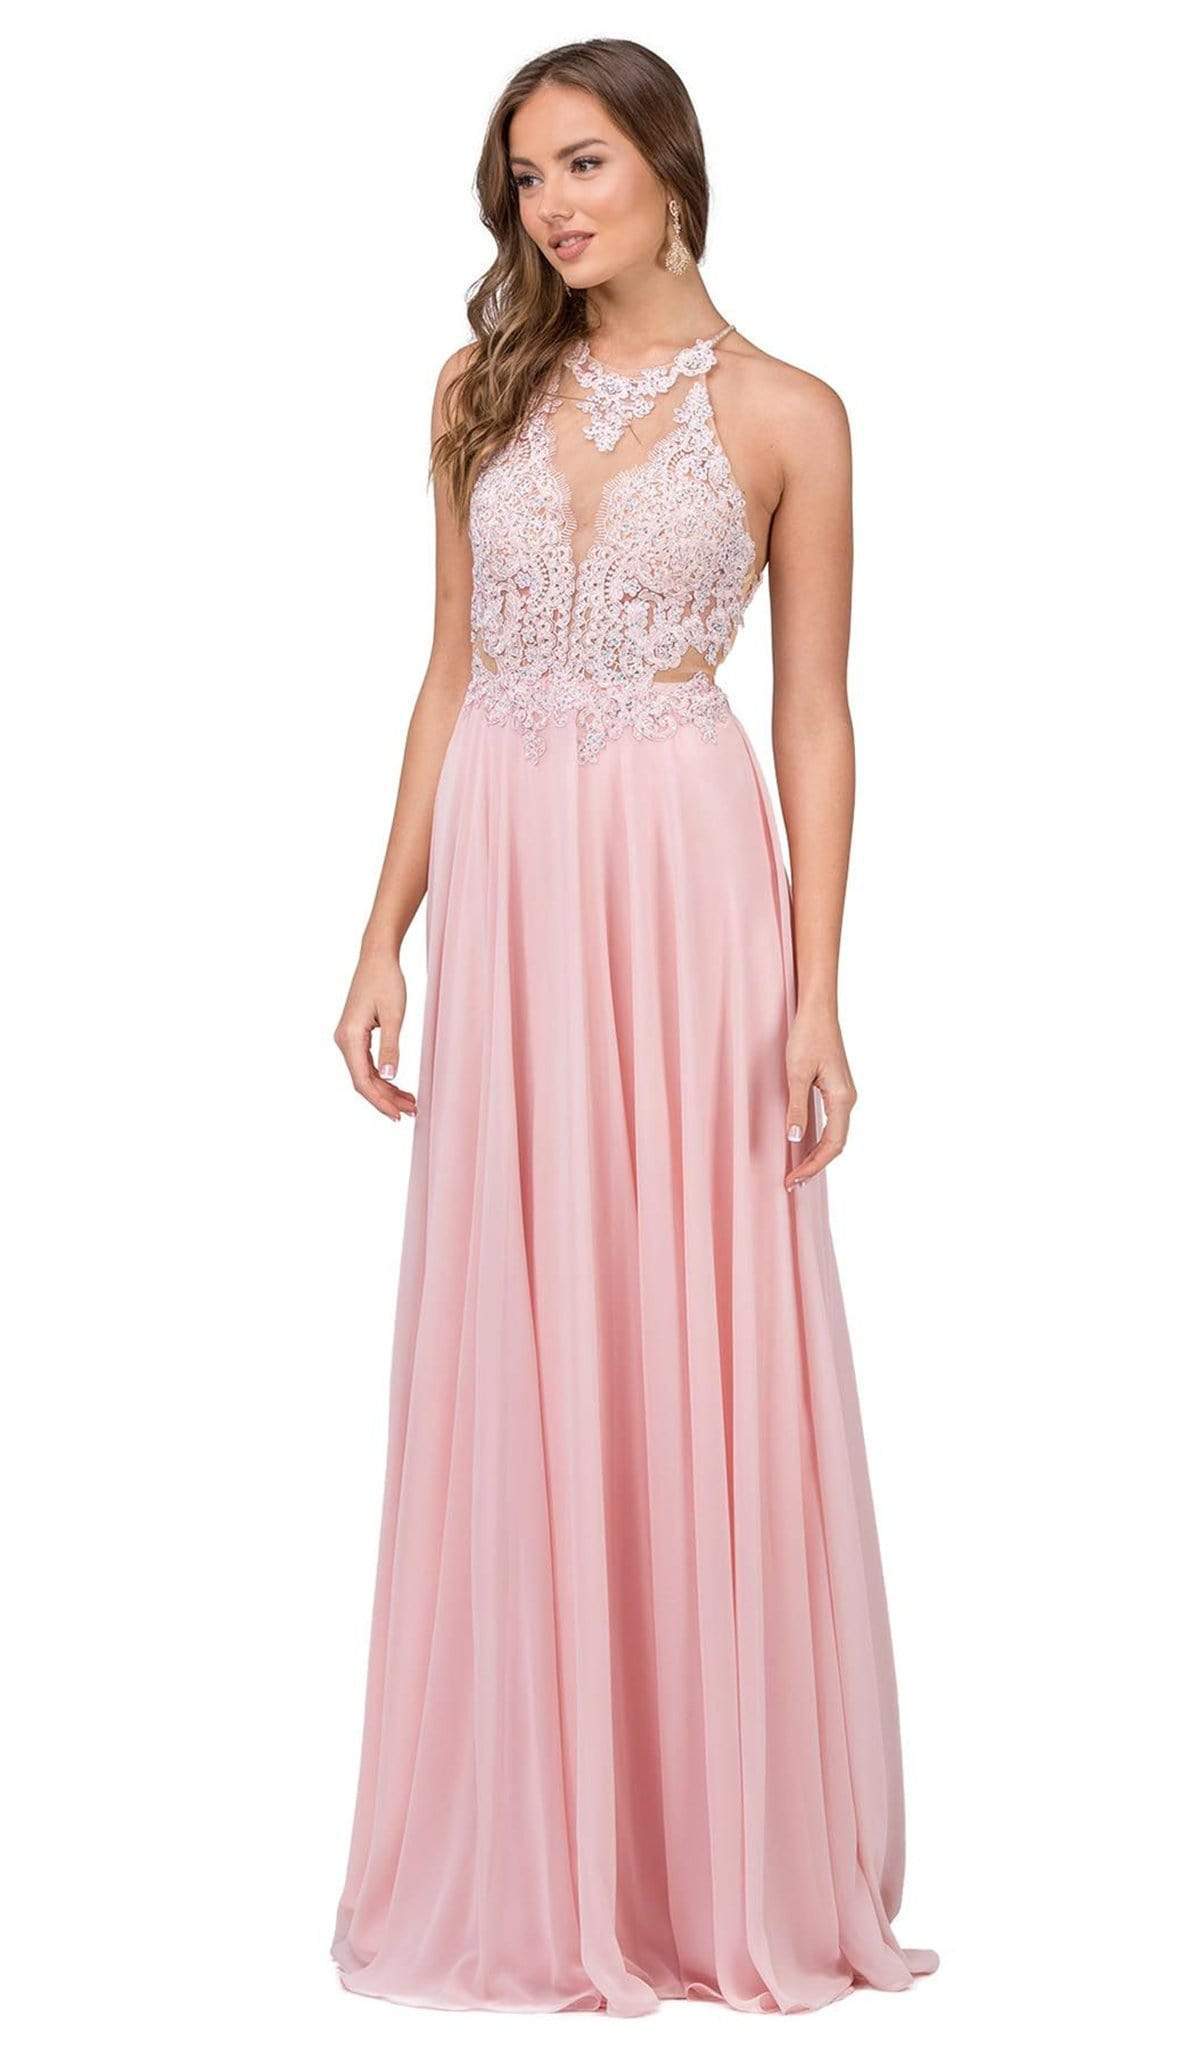 Dancing Queen - 2015 Lace Embellished Illusion Bodice Chiffon Gown